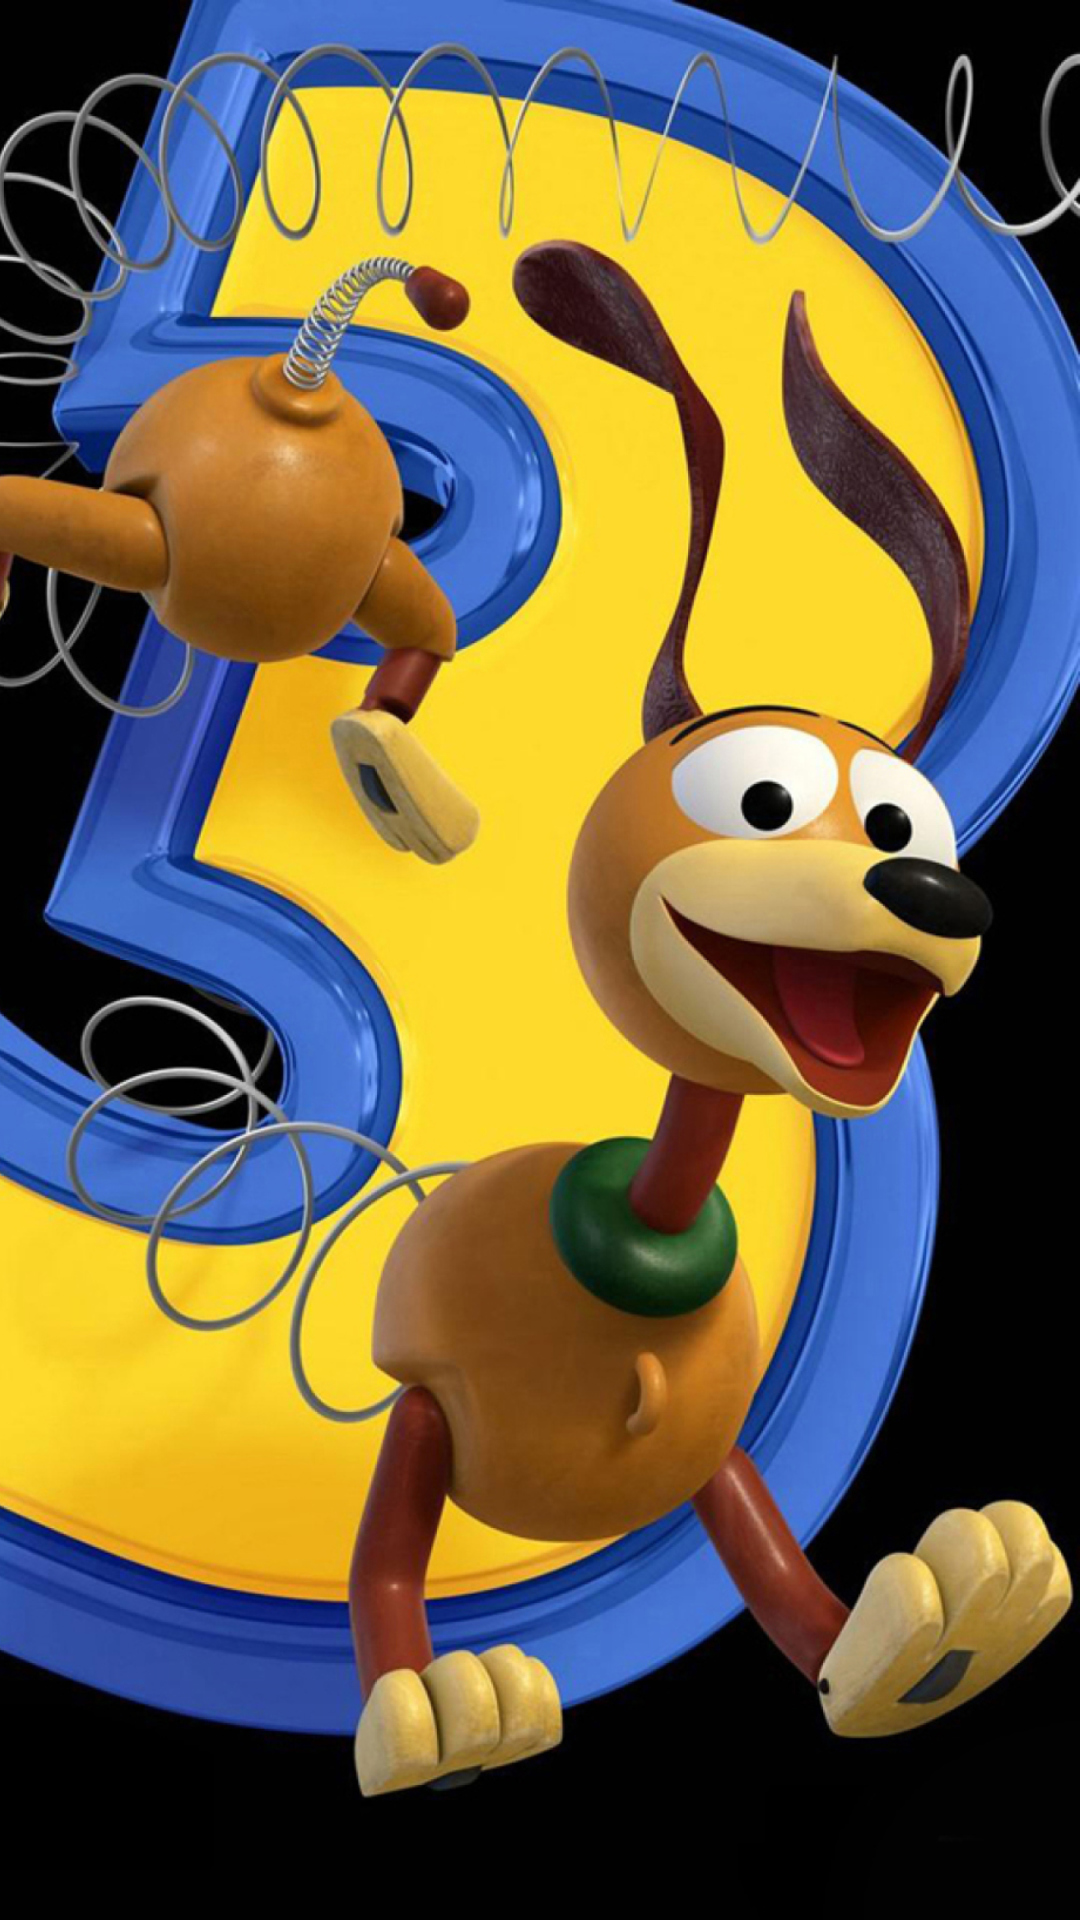 Dog From Toy Story 3 wallpaper 1080x1920